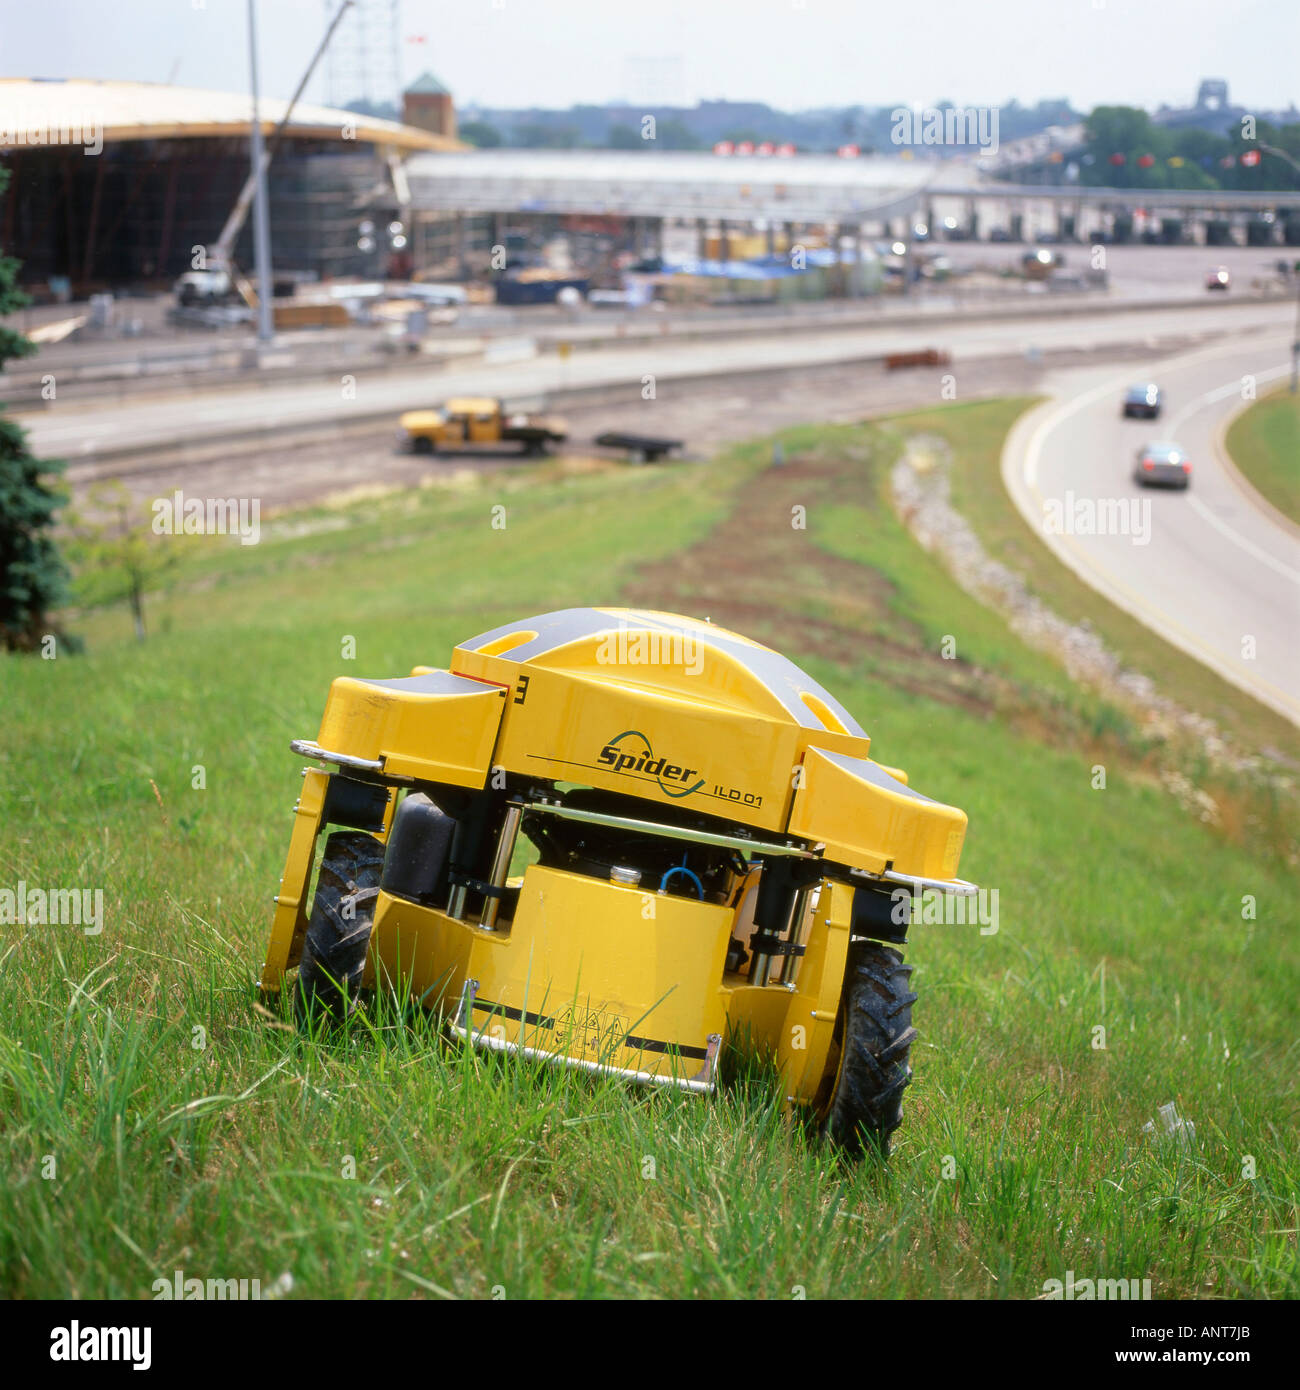 A remote control industrial grass cutter near the Peace Bridge Fort Erie Ontario Canada Stock Photo